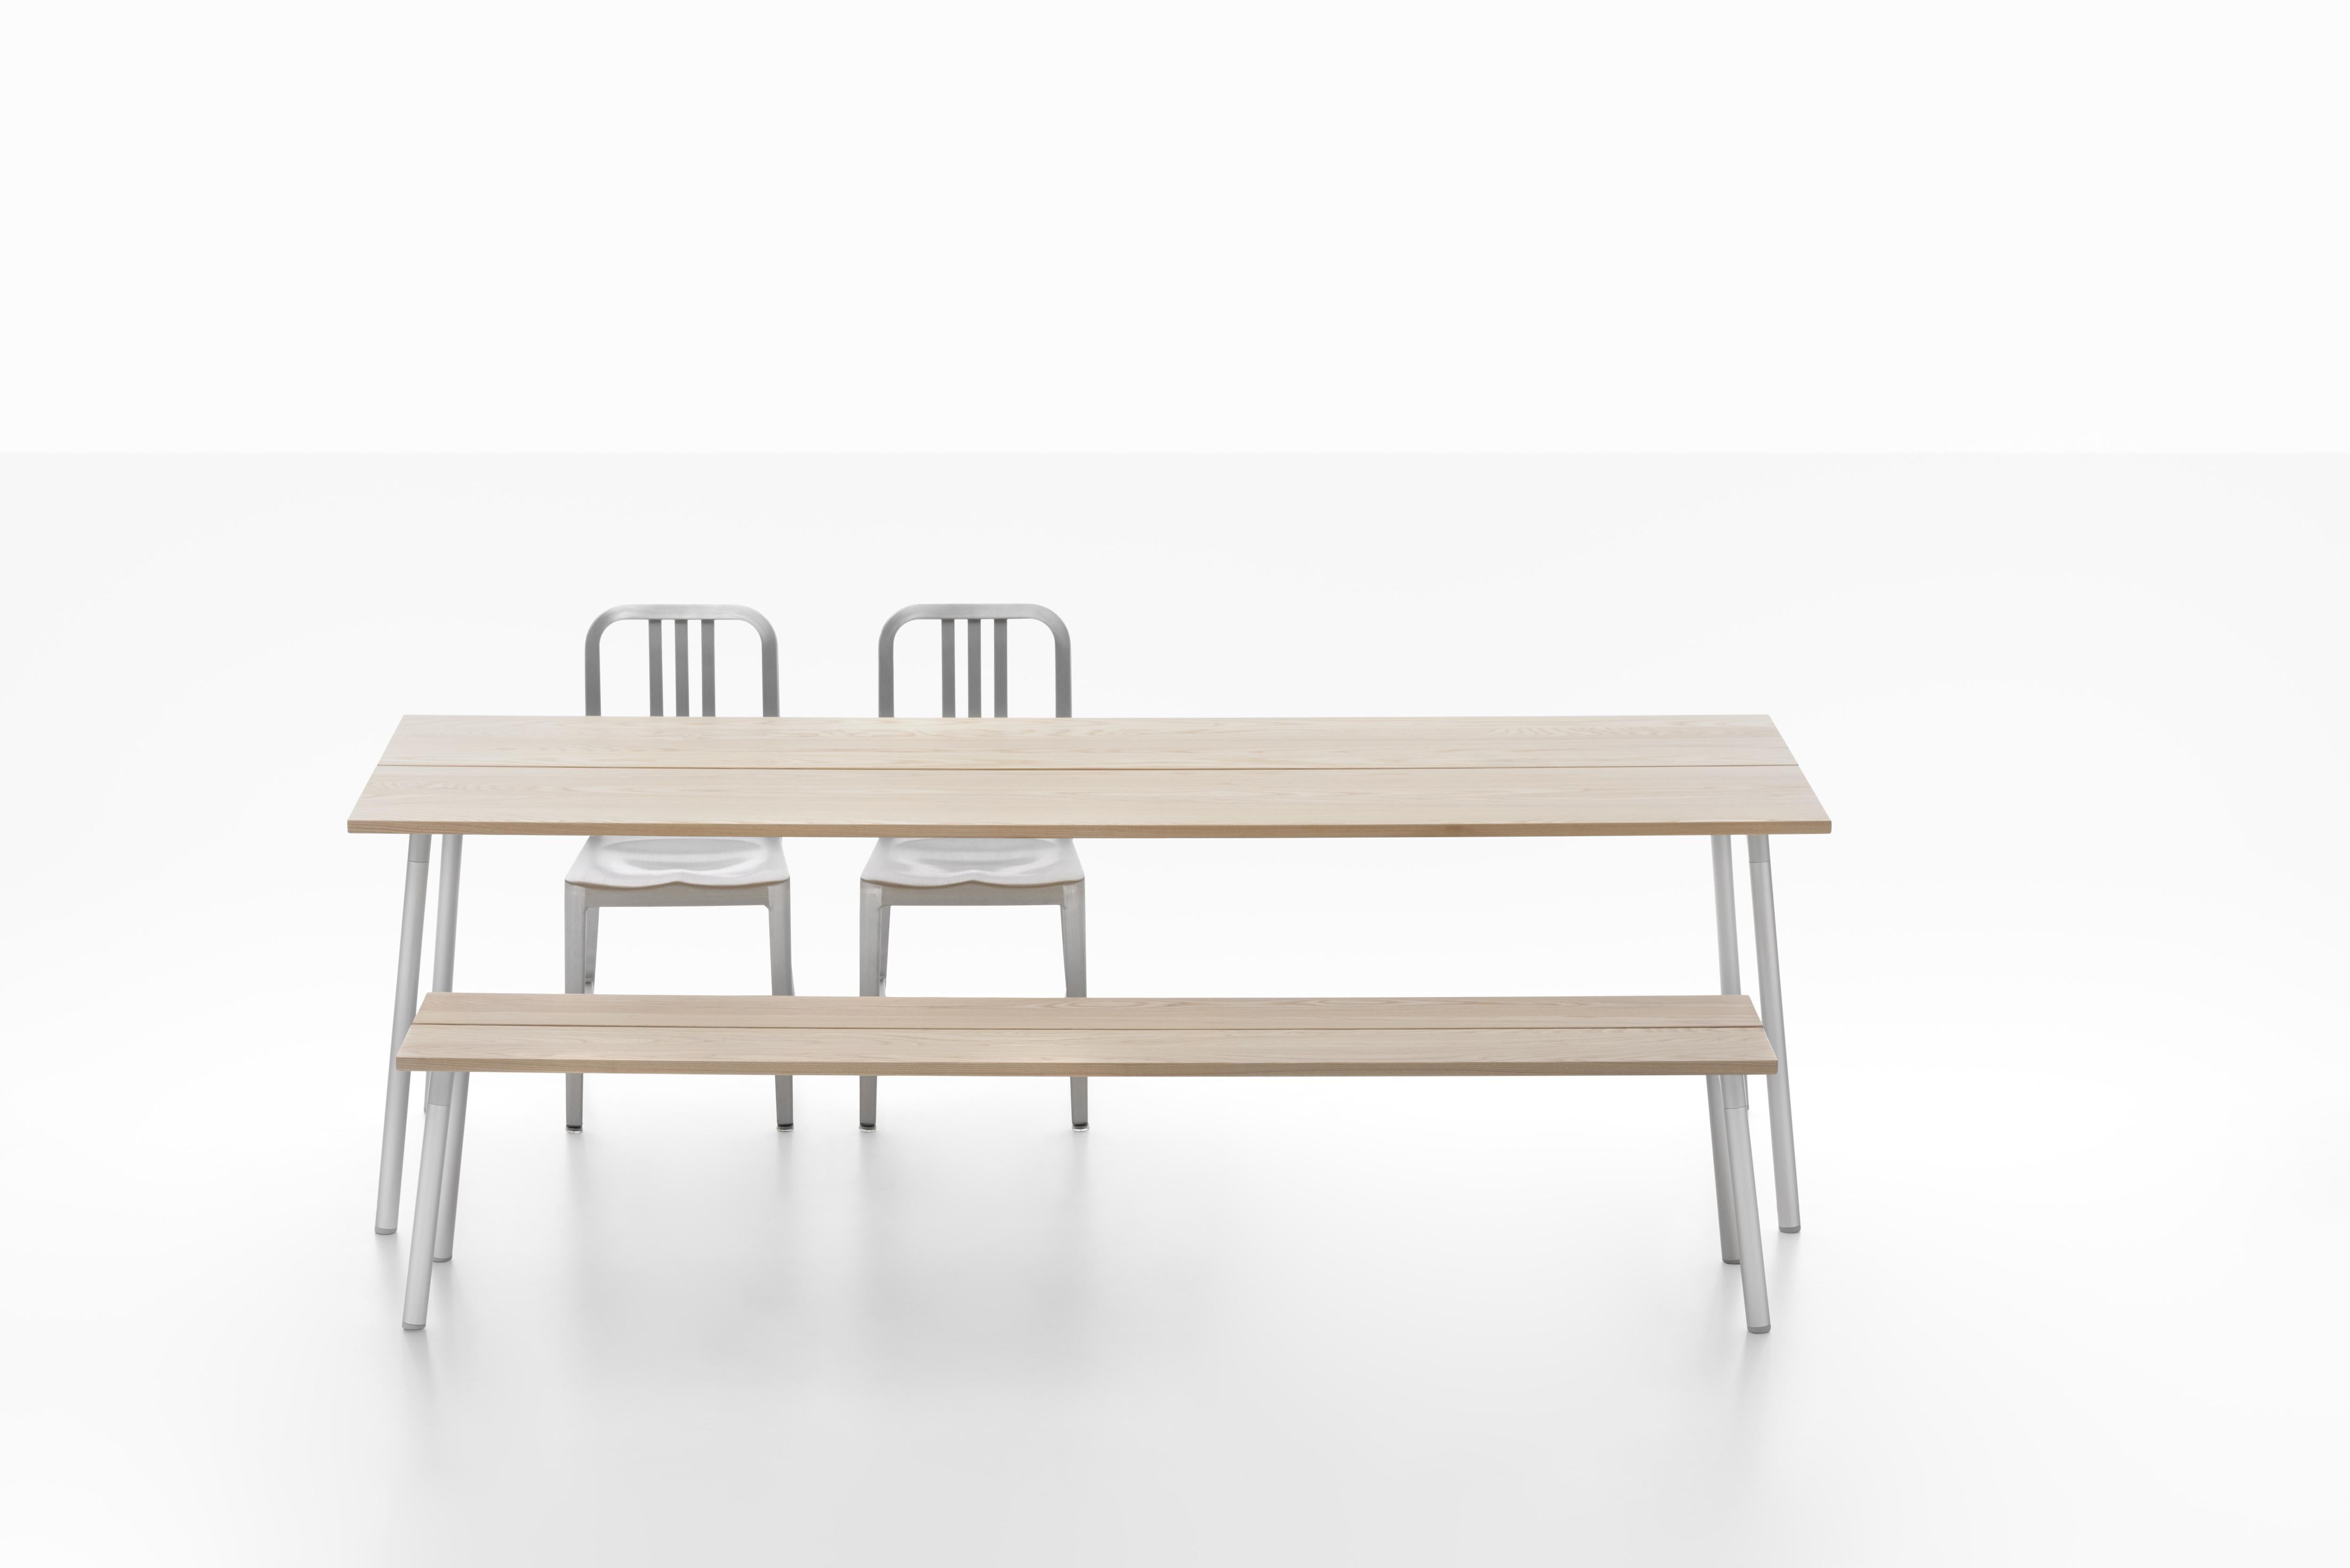 Contemporary Emeco Run 4-Seat Bench in Aluminum and Walnut by Sam Hecht & Kim Colin For Sale